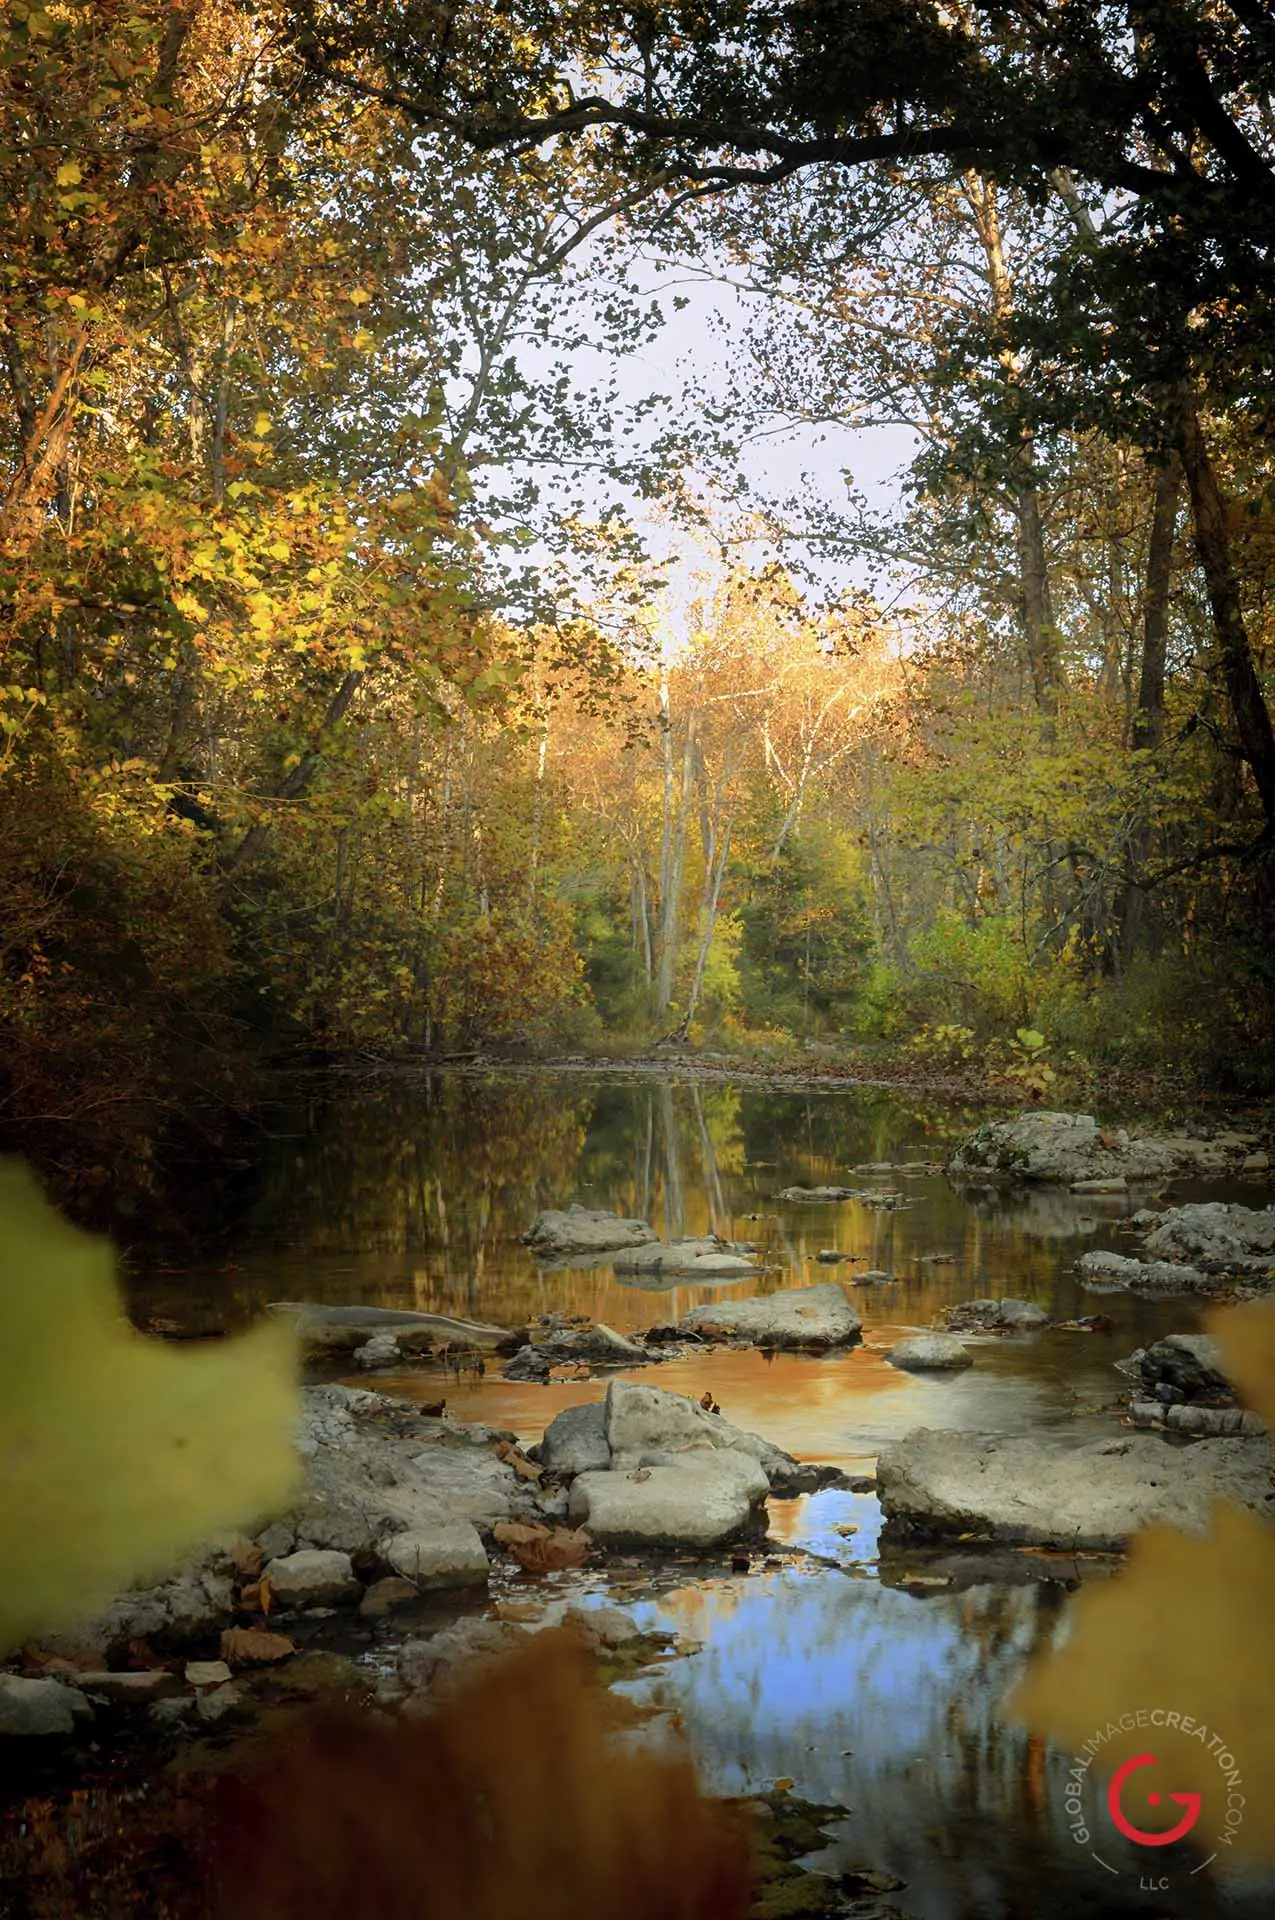 A creek flows thru the fall colors of the Ozarks. - Advertising photographers in Branson Missouri, Branson Missouri photography